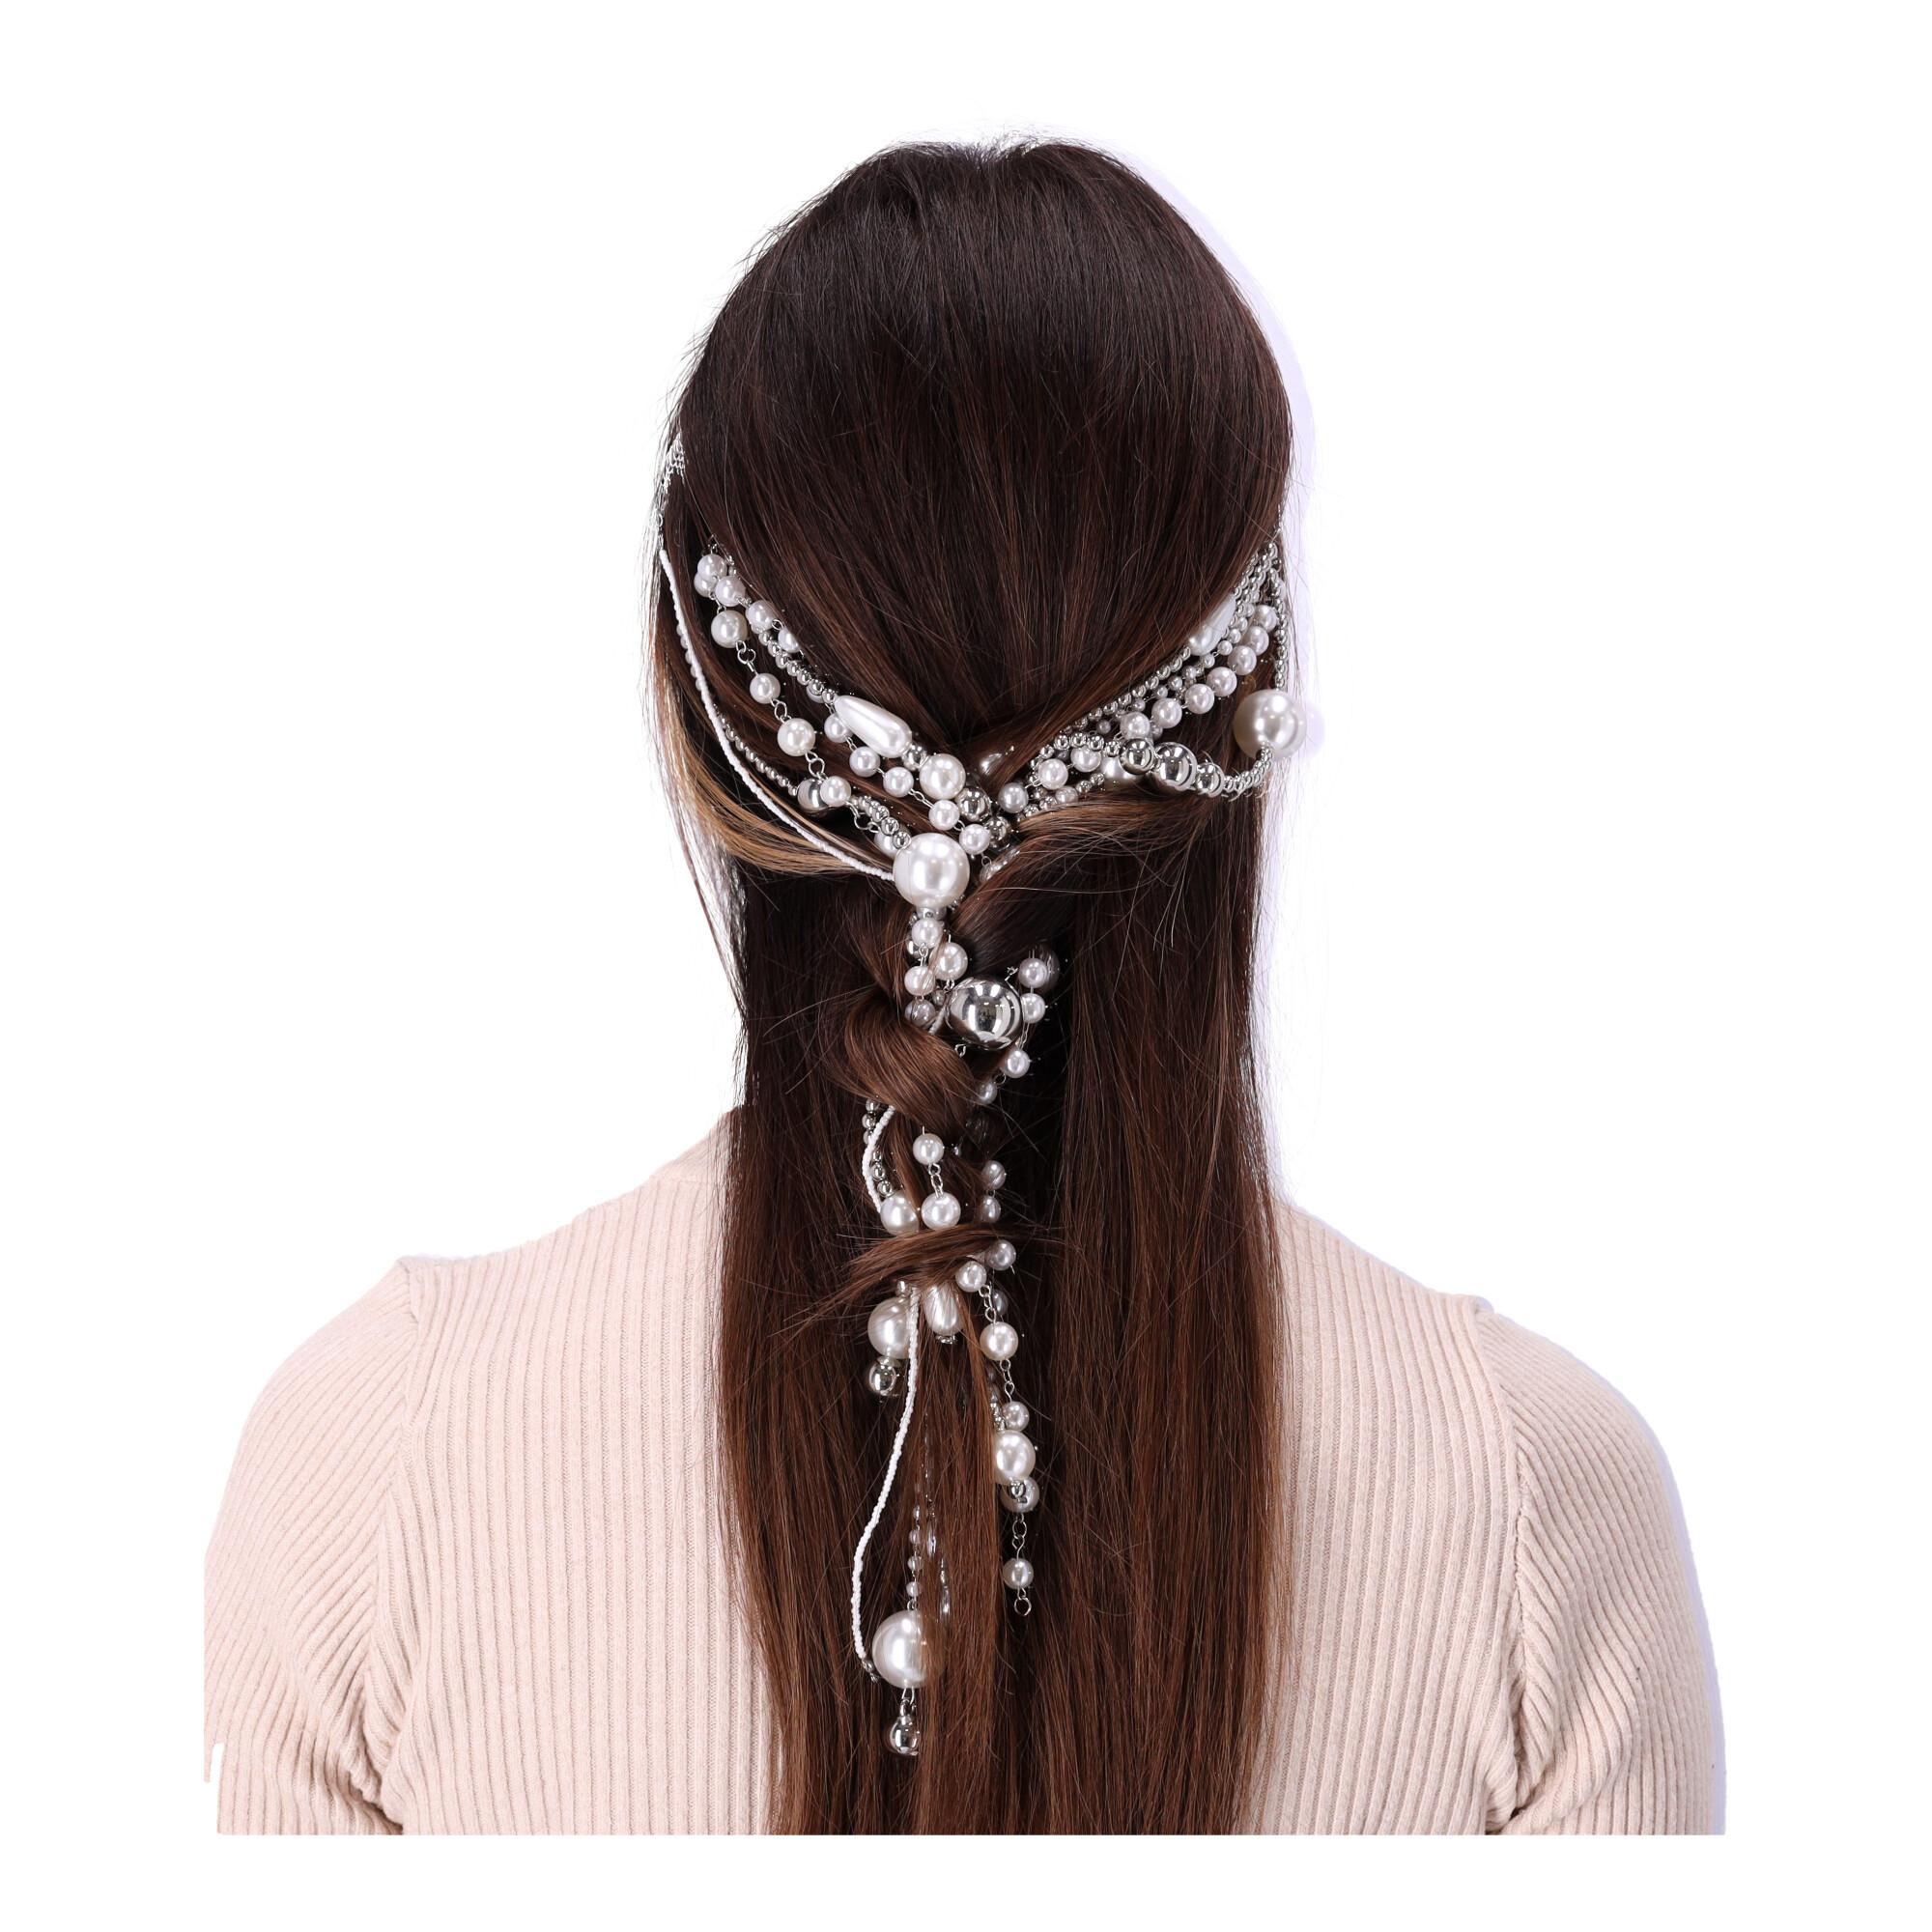 Decorative hairband with pearls on a chain - silver